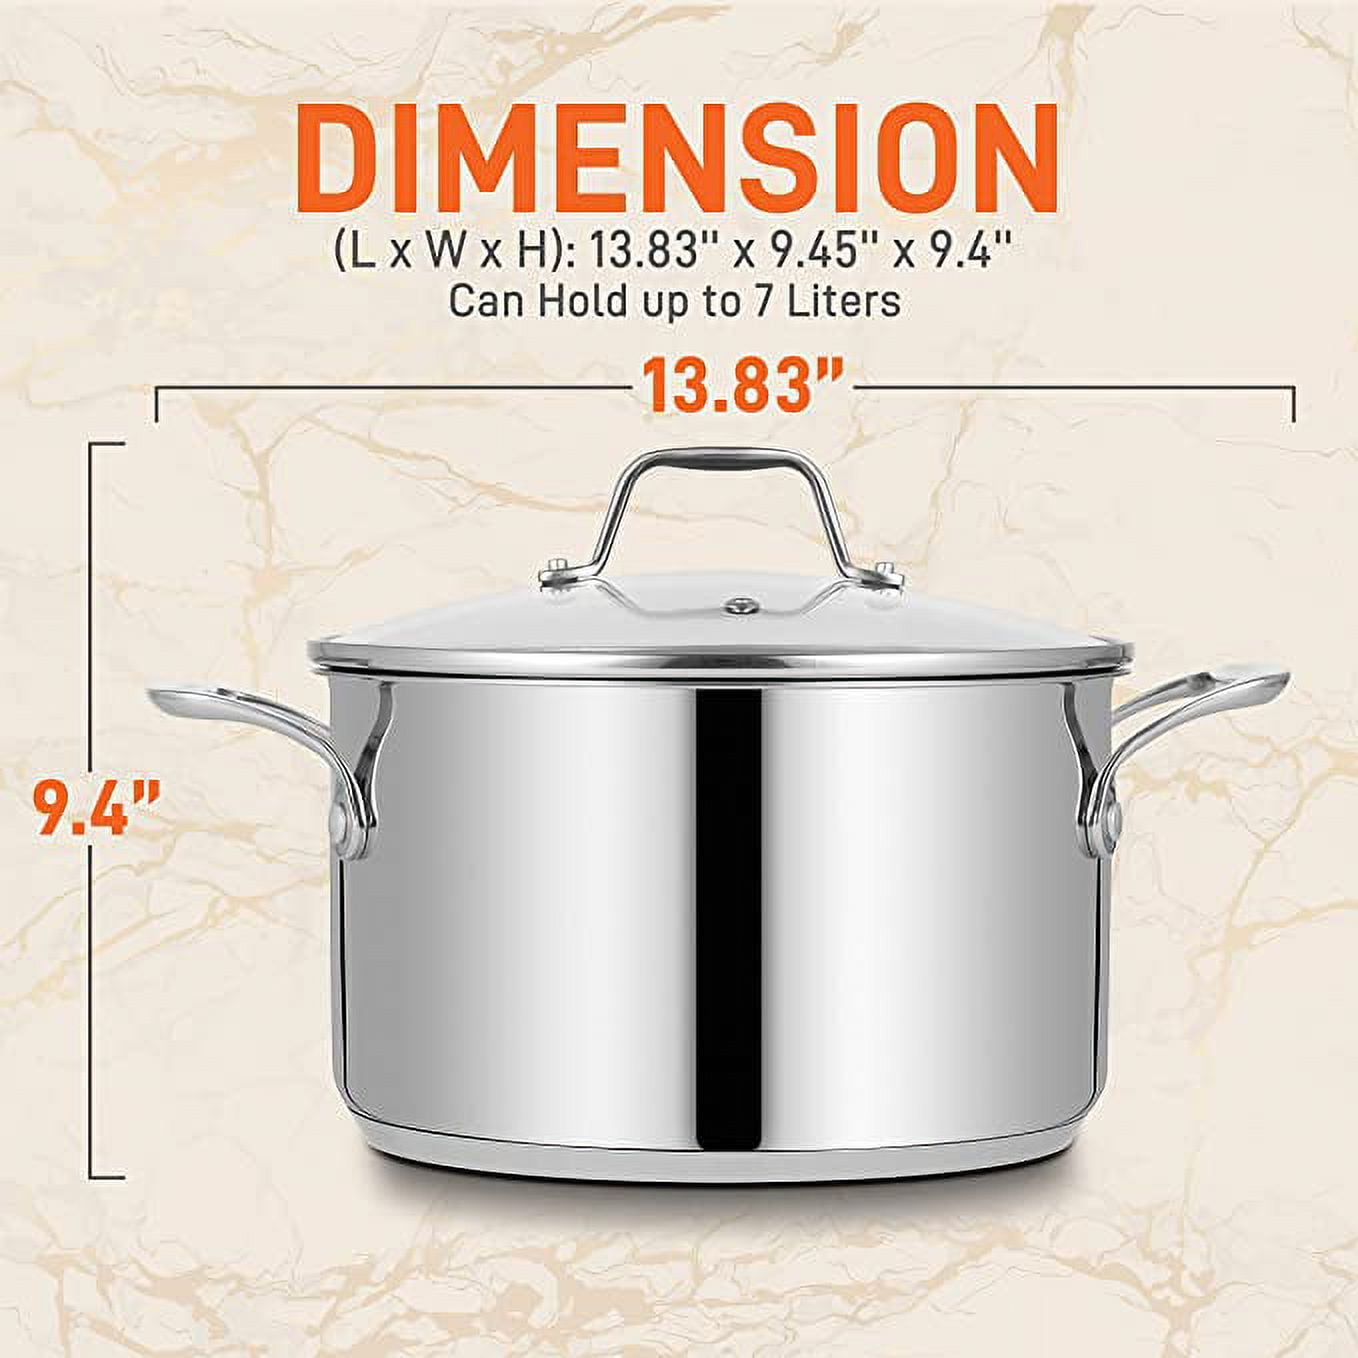 Ciwete 8 Quart Stock Pot, 3 Ply Stainless Steel Stock Pot, Soup Pot Cooking Pot with Lid